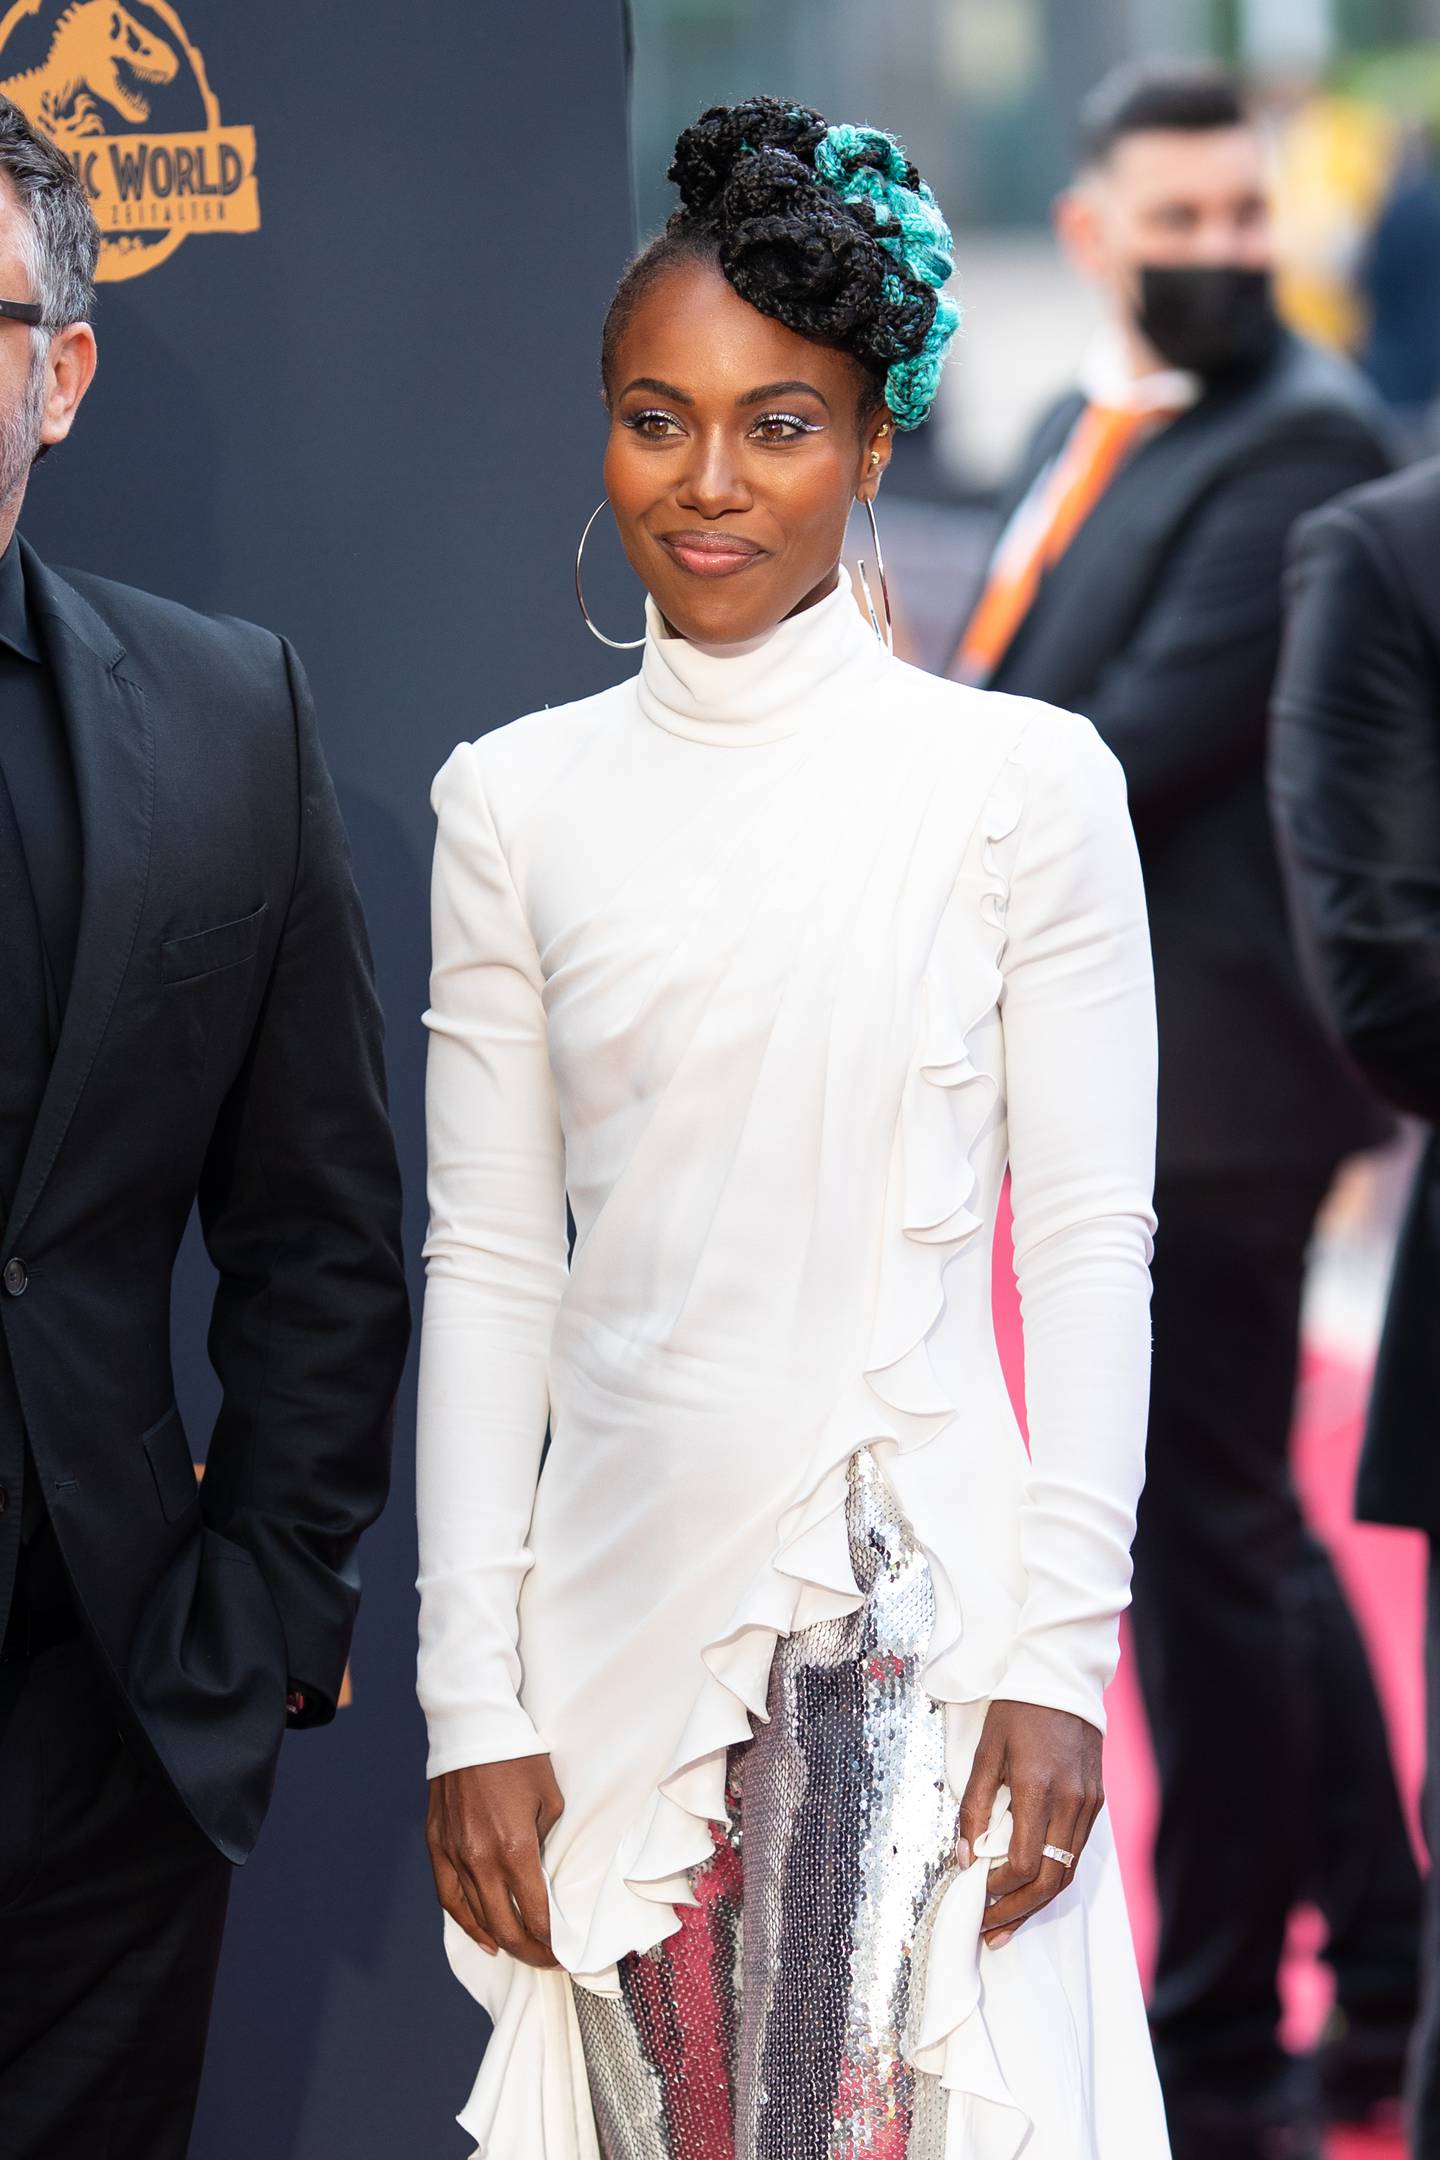 DeWanda Wise attends the "Jurassic World: Ein neues Zeitalter" Photocall at Medienpark on May 30, 2022 in Cologne, Germany.